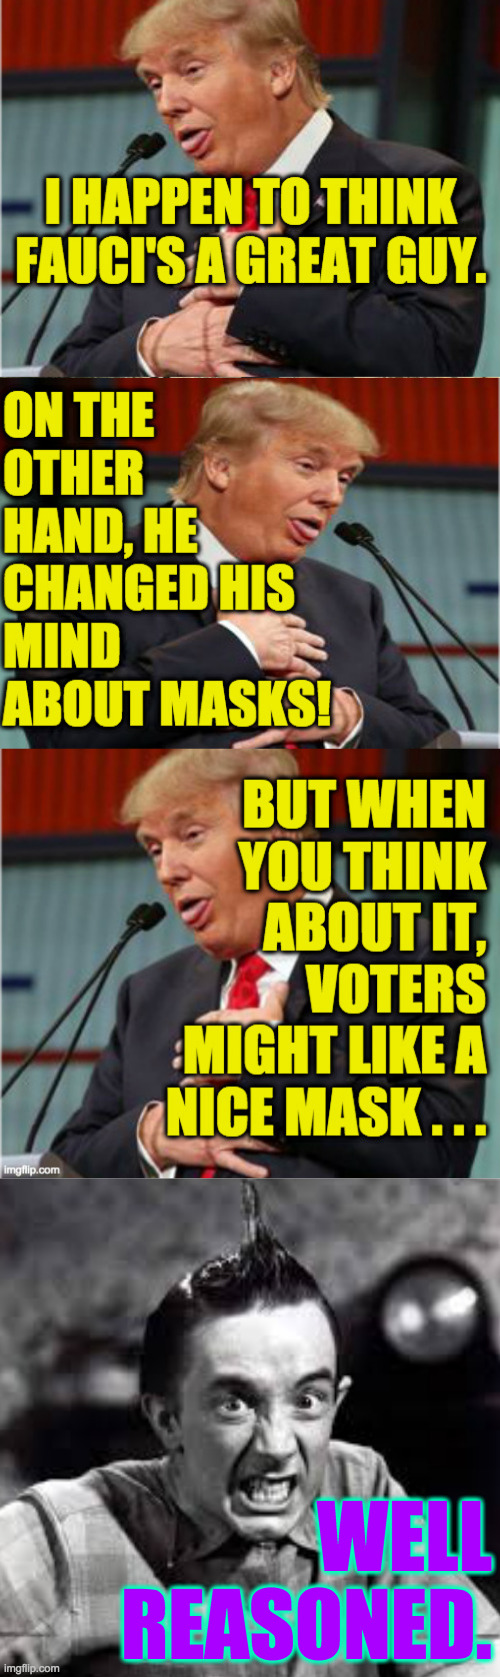 I can see why Trump doesn't like people who can't make up their minds. | WELL REASONED. | image tagged in memes,indecision,idiot trump | made w/ Imgflip meme maker